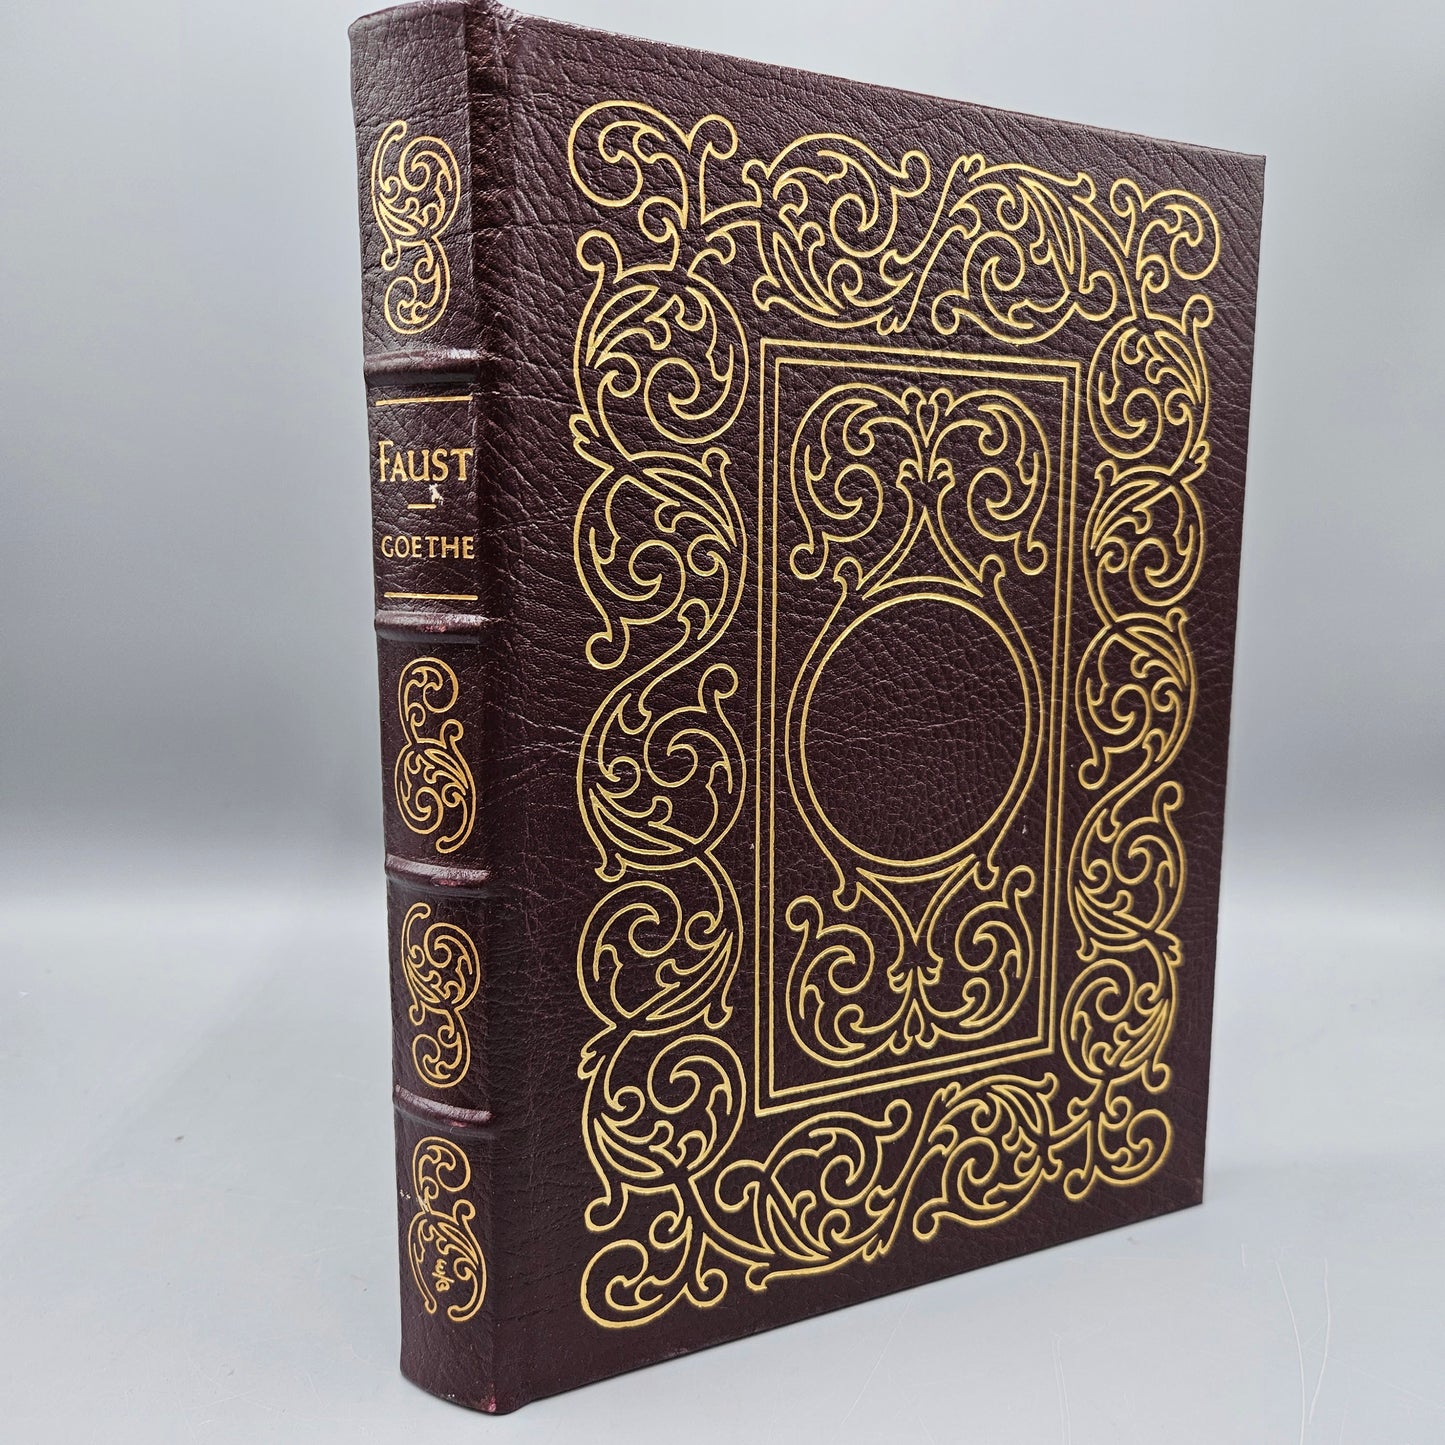 Leatherbound Book - Goethe "Faust" Easton Press